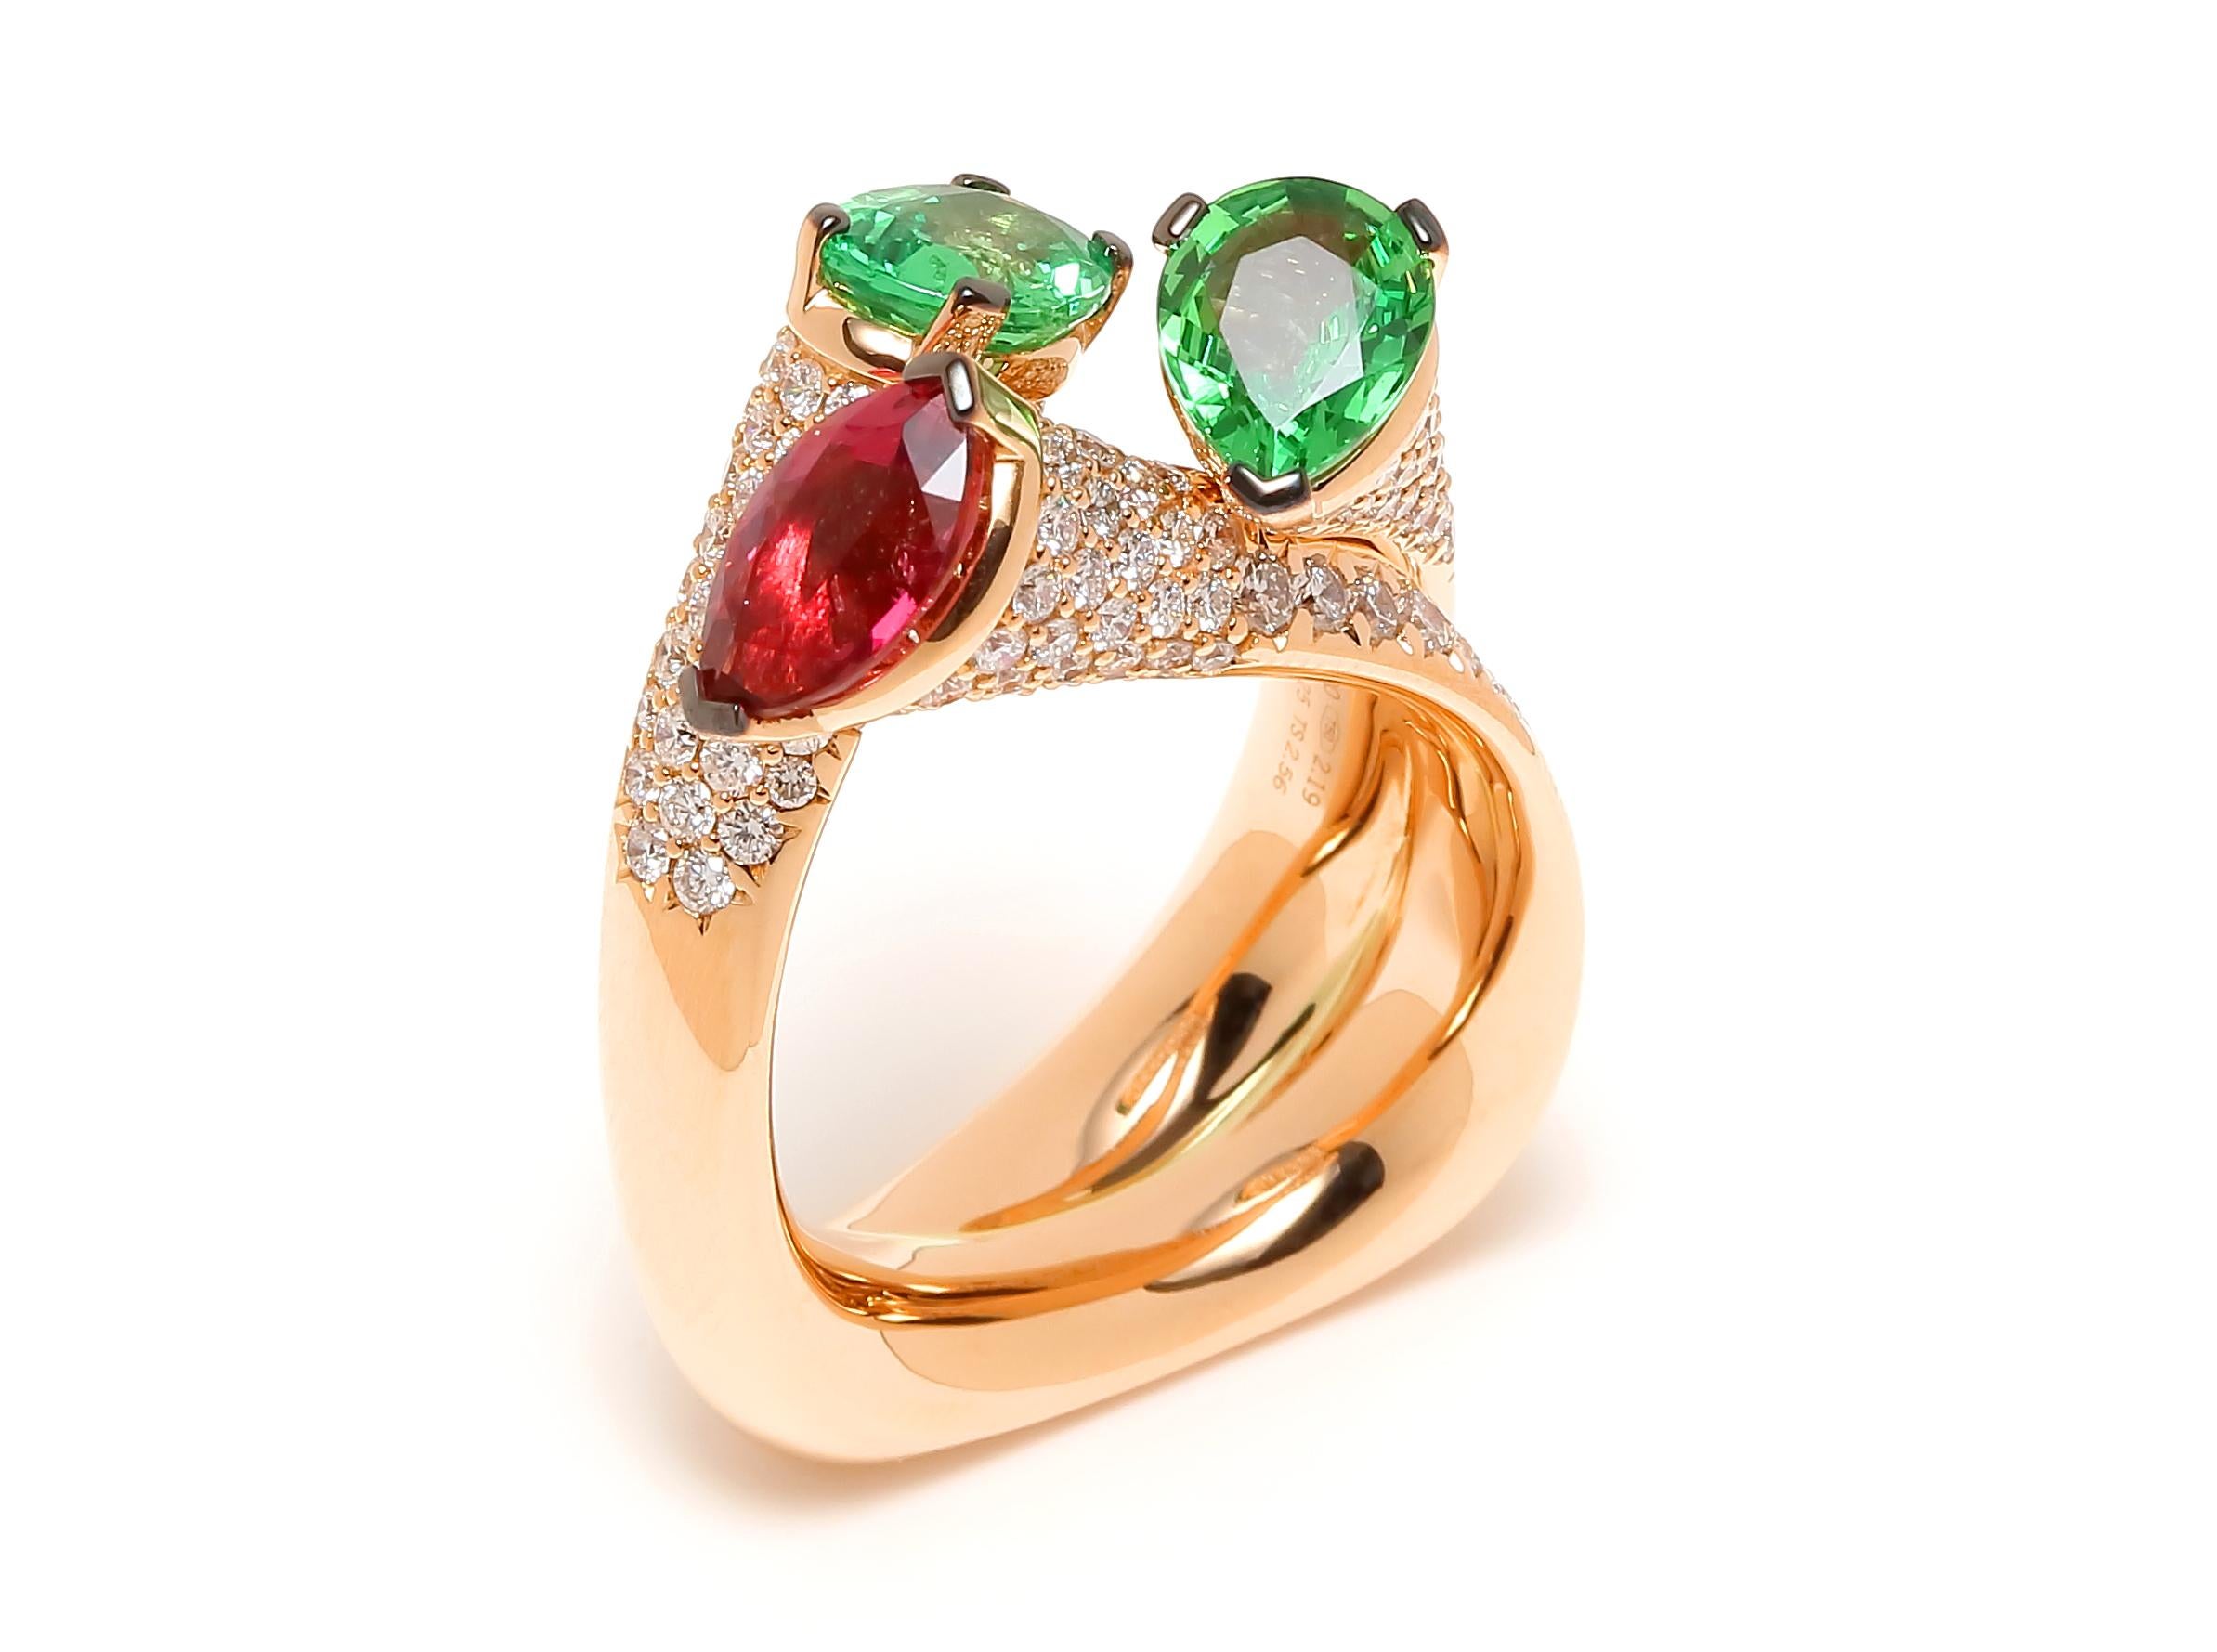 Red & Green Twist Layers Ring

Diamond Green Tsavorite Rubellite Pink Tourmaline Cocktail 18 Karat Gold Ring 

The winning swing and the architectural purity are the relevant ingredients for these rings of contemporary inspiration. Not only a matter